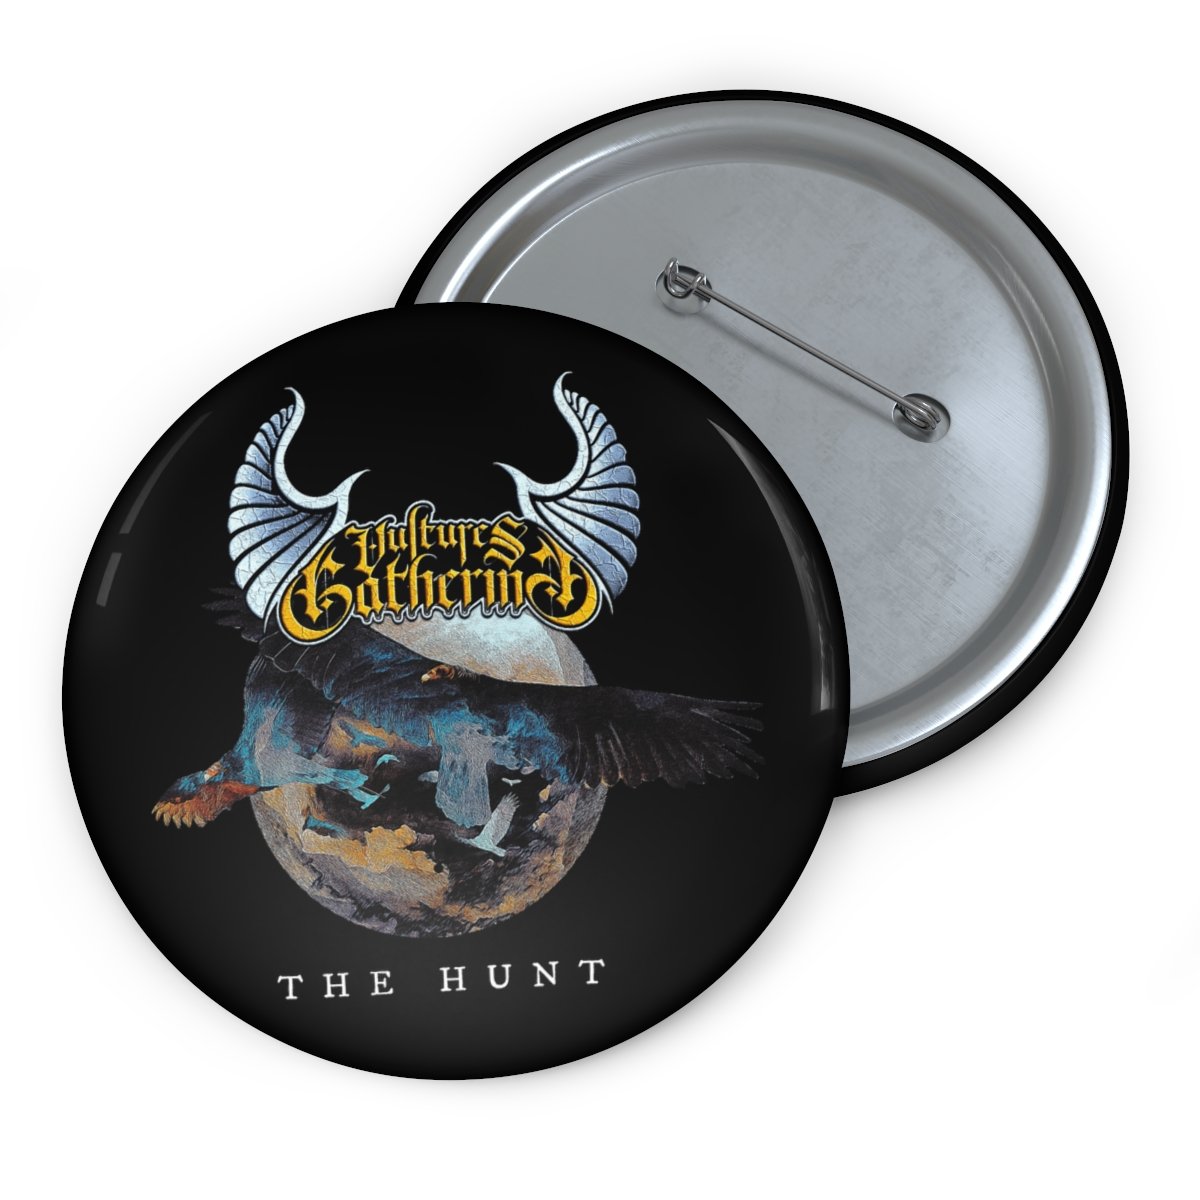 Vultures Gathering – The Hunt (Globe) Pin Buttons